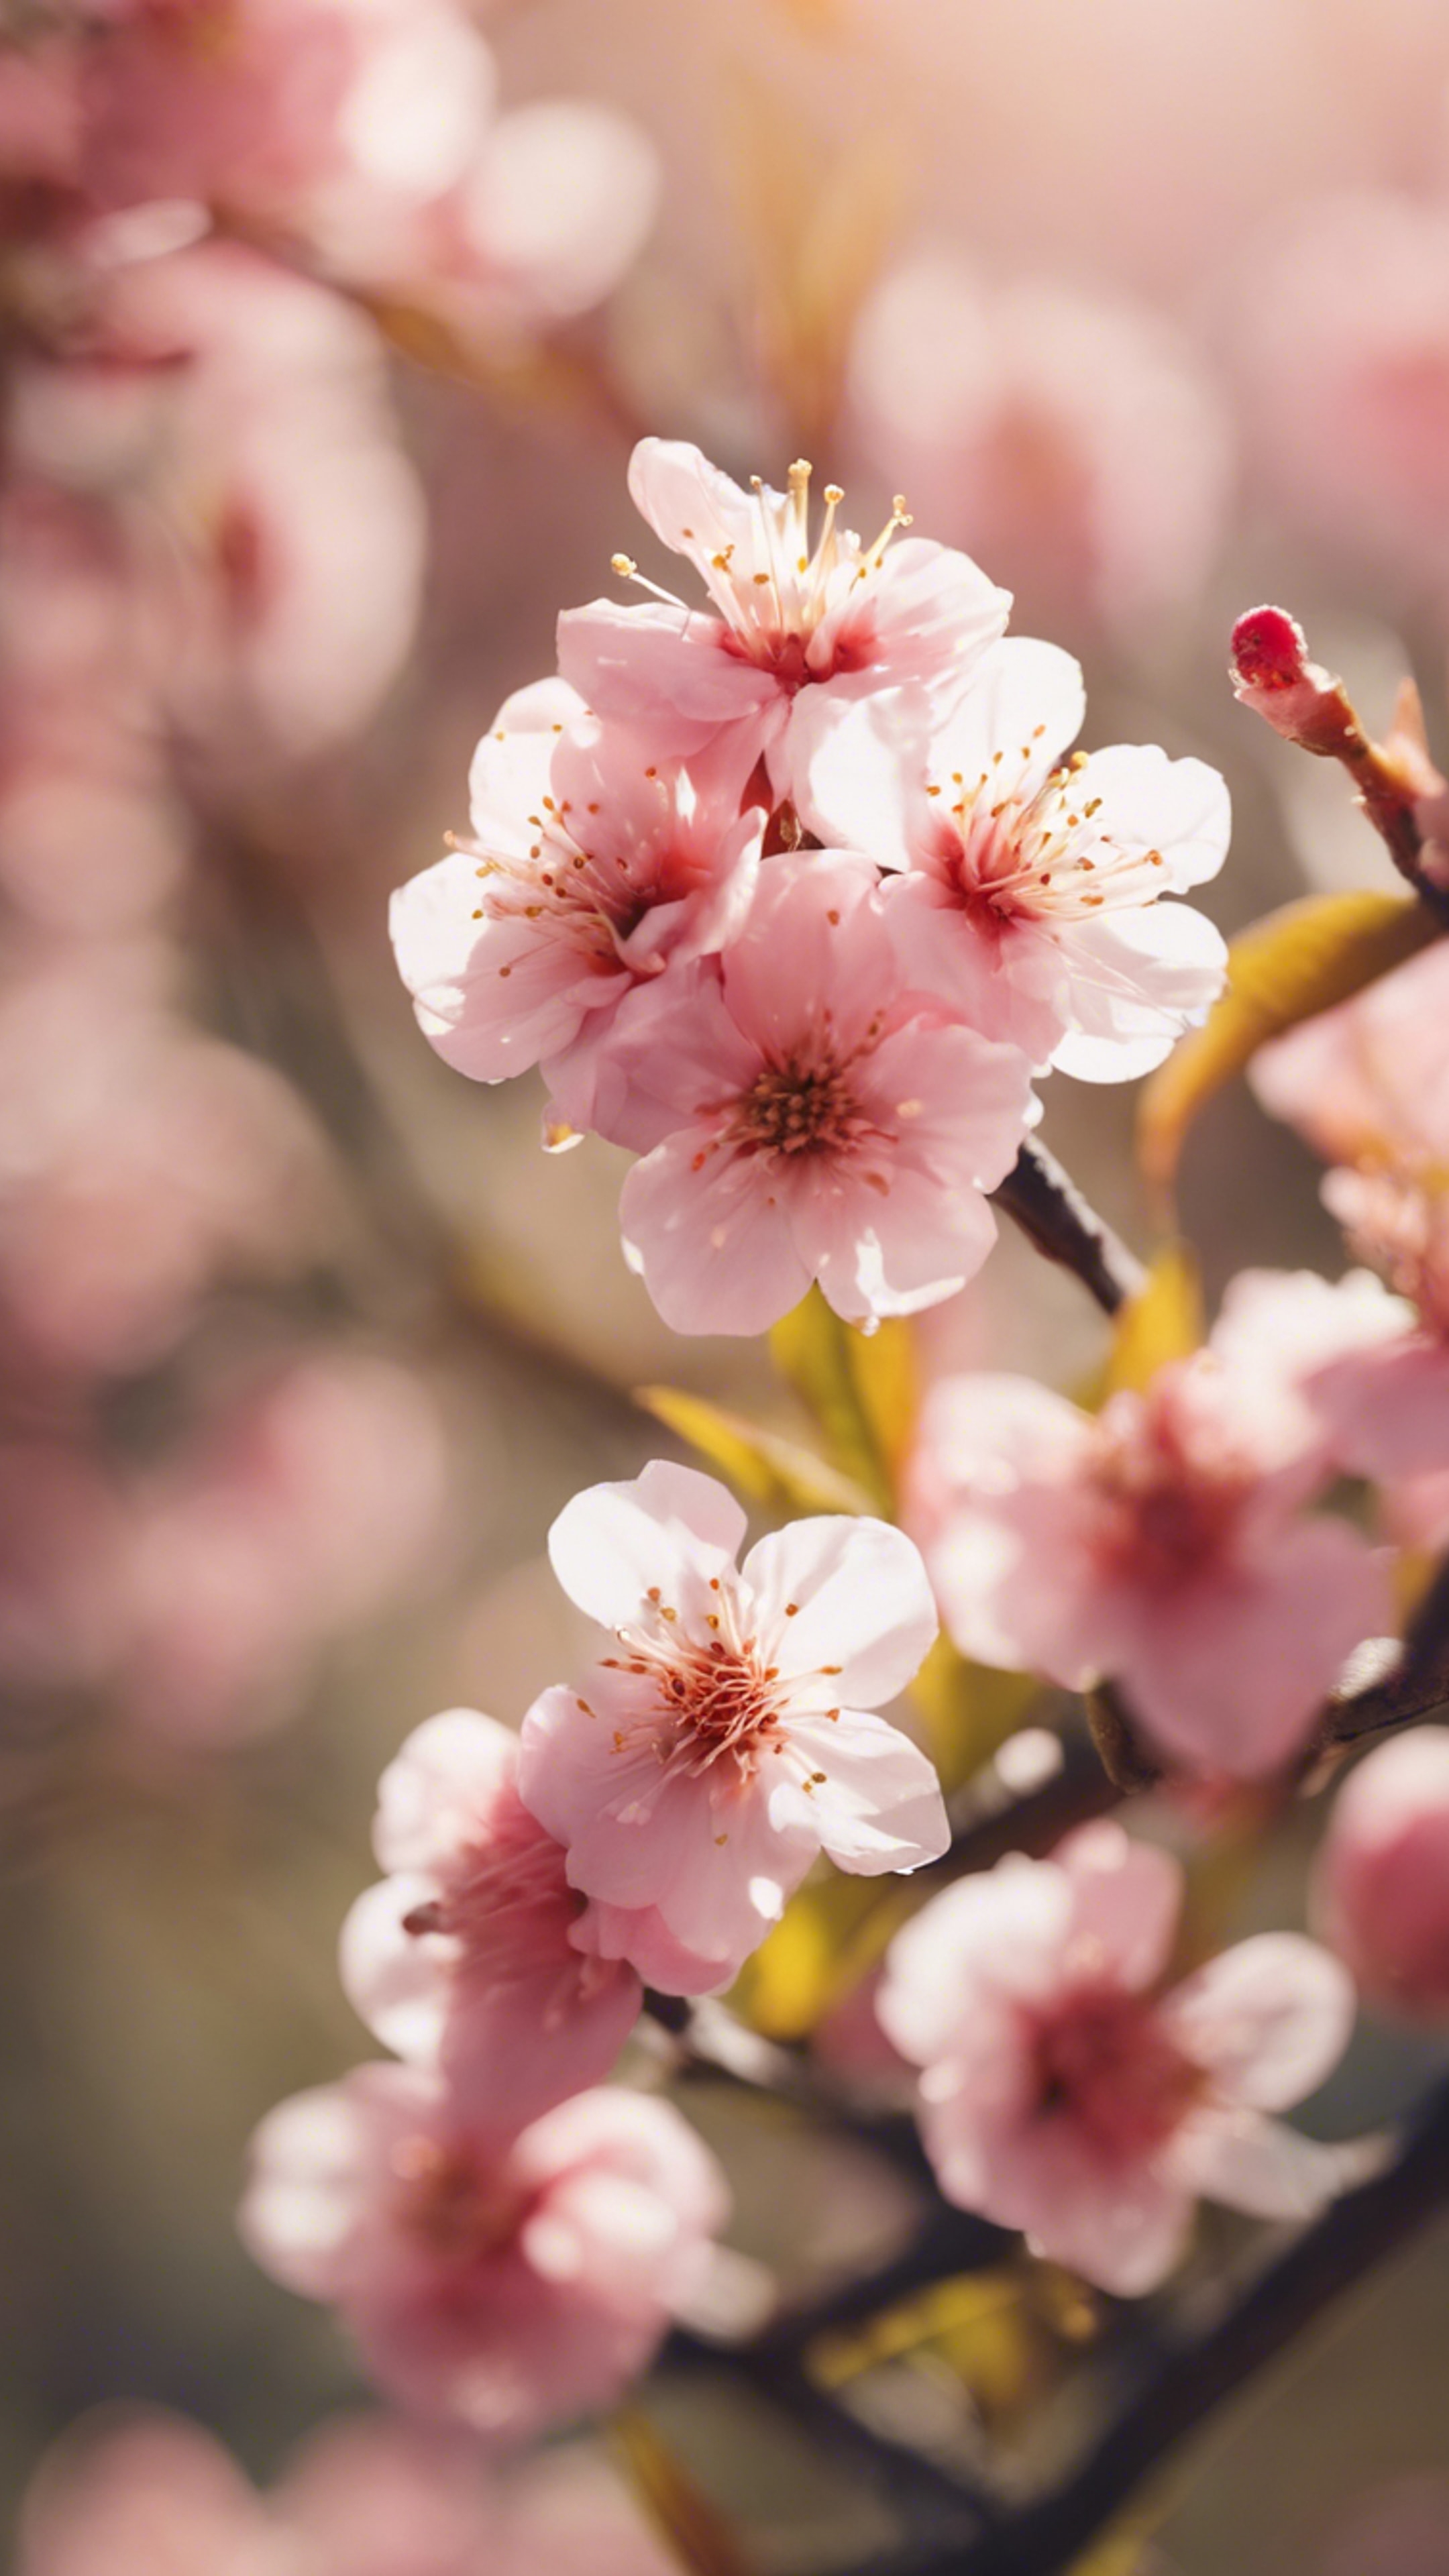 A close-up of happy peach flowers blooming cheerfully on a sunny spring day. Tapet[9ab03d009b524efe8bfb]